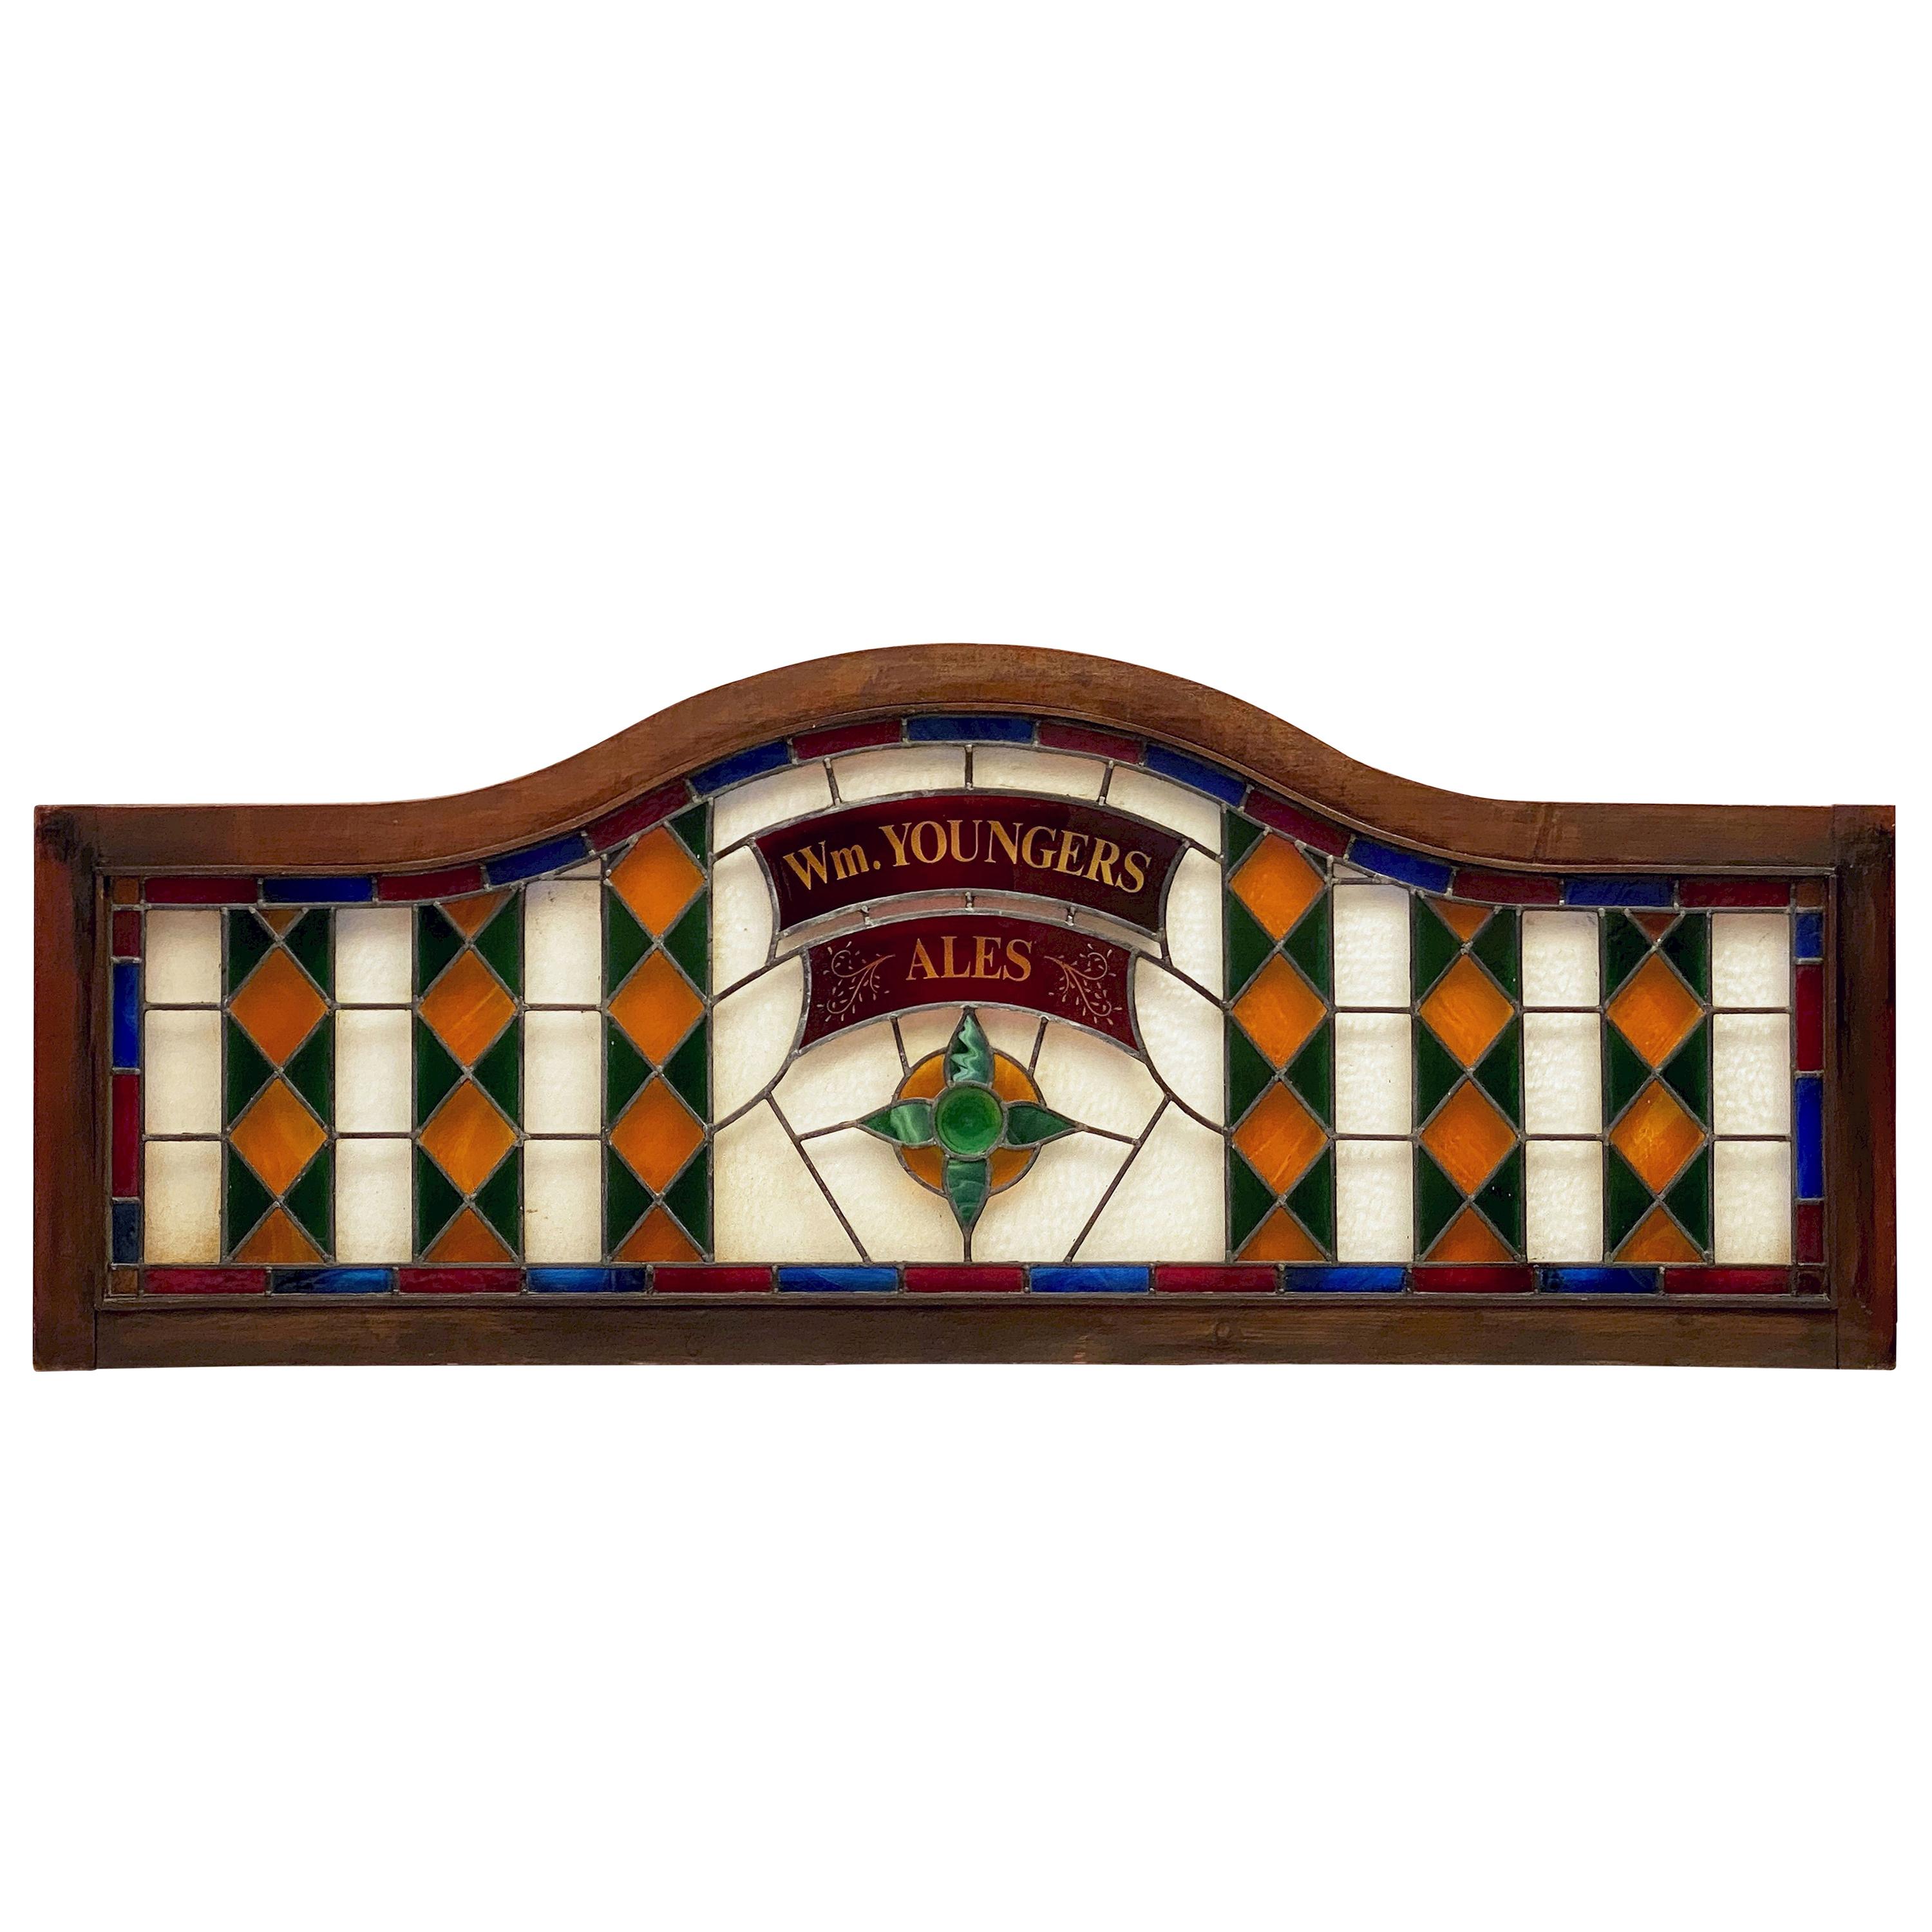 Large Wm. Youngers Ales Stained Glass Pub Sign from Scotland